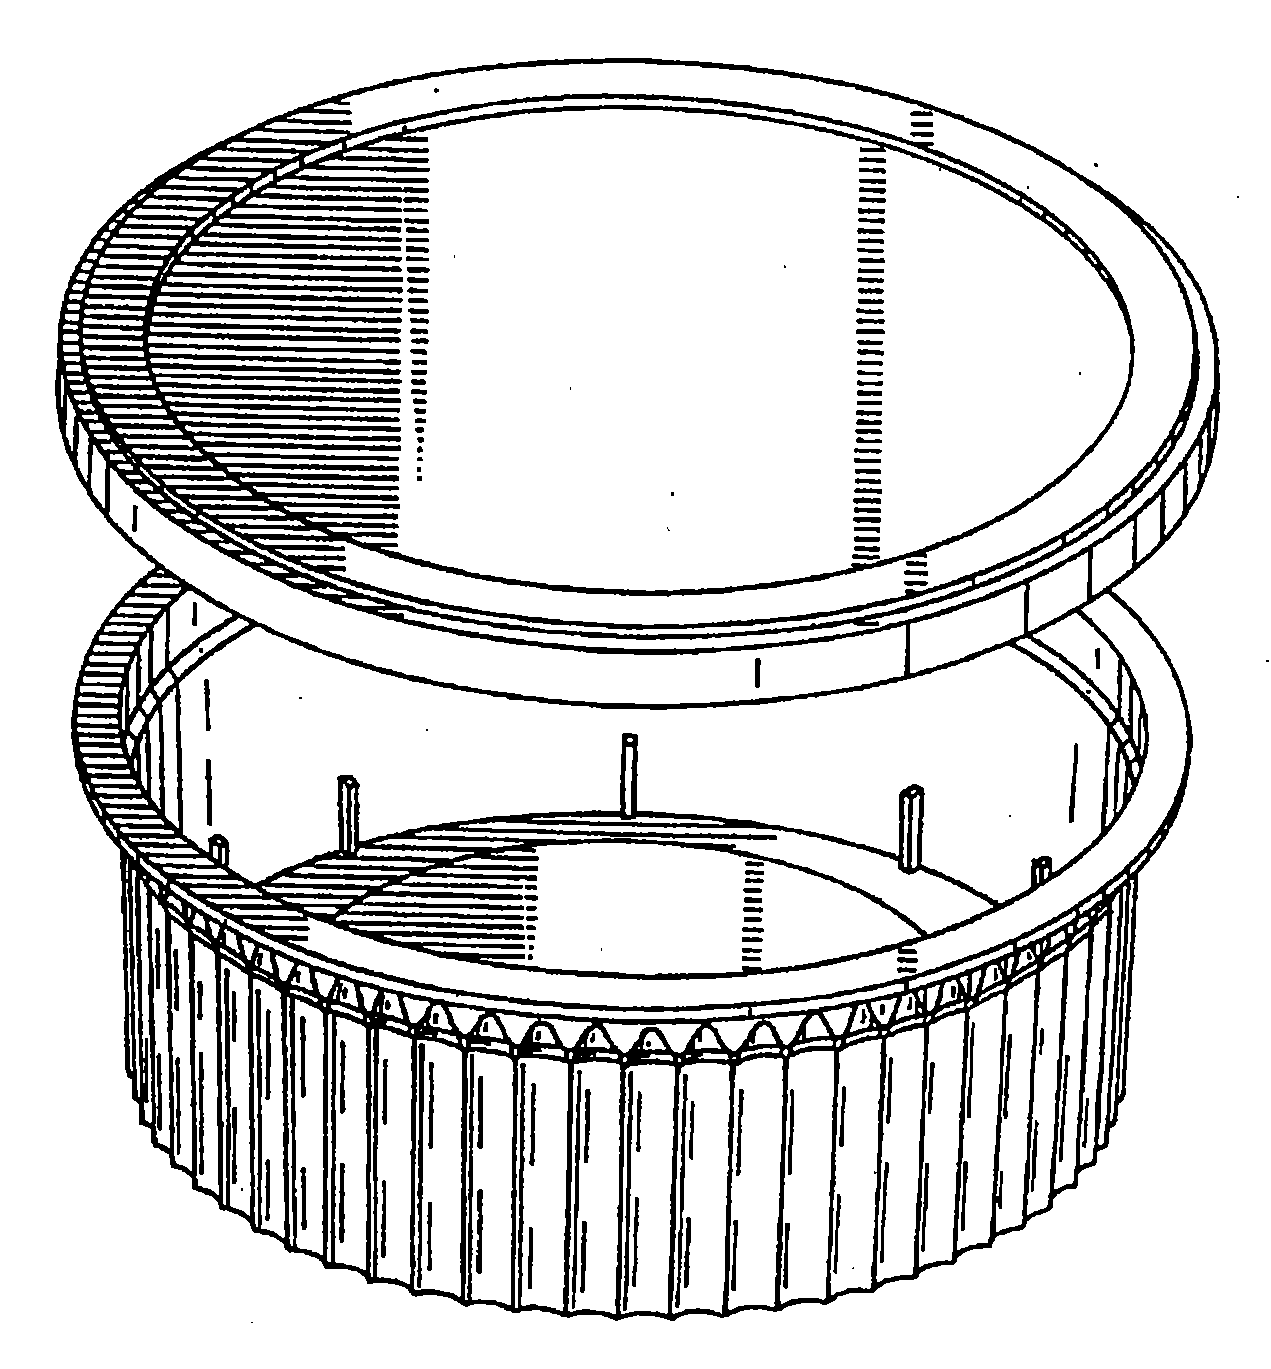 Example of a design for a food server with three or more repeatsabout axis.
